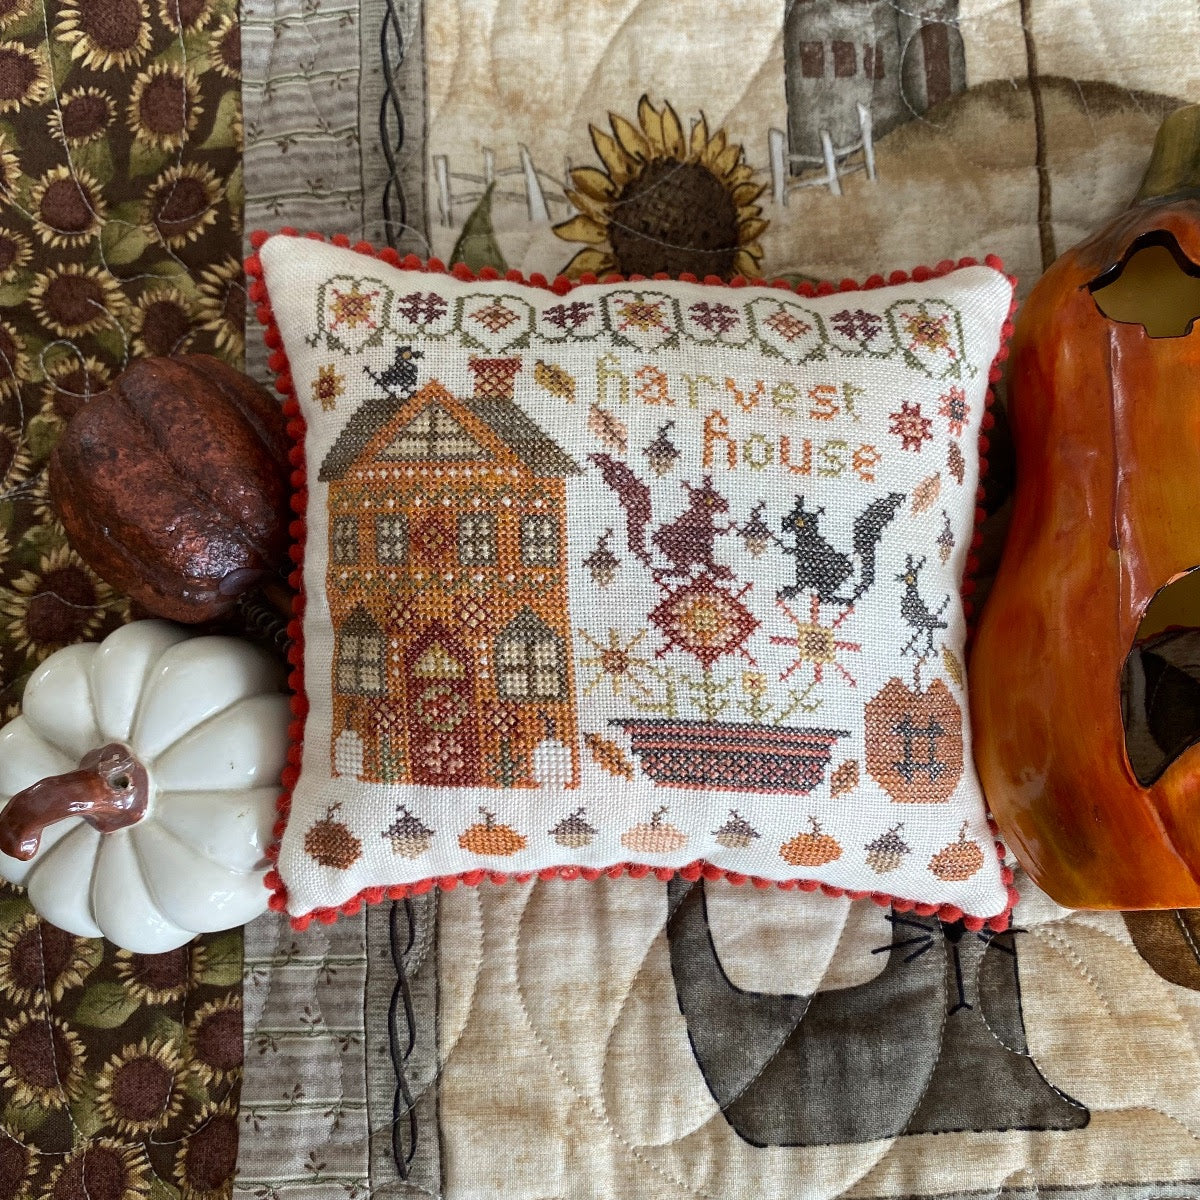 Harvest House - The Houses on Pumpkin Lane #9 - Pansy Patch Quilts and Stitchery, Needlecraft Patterns, The Crafty Grimalkin - A Cross Stitch Store